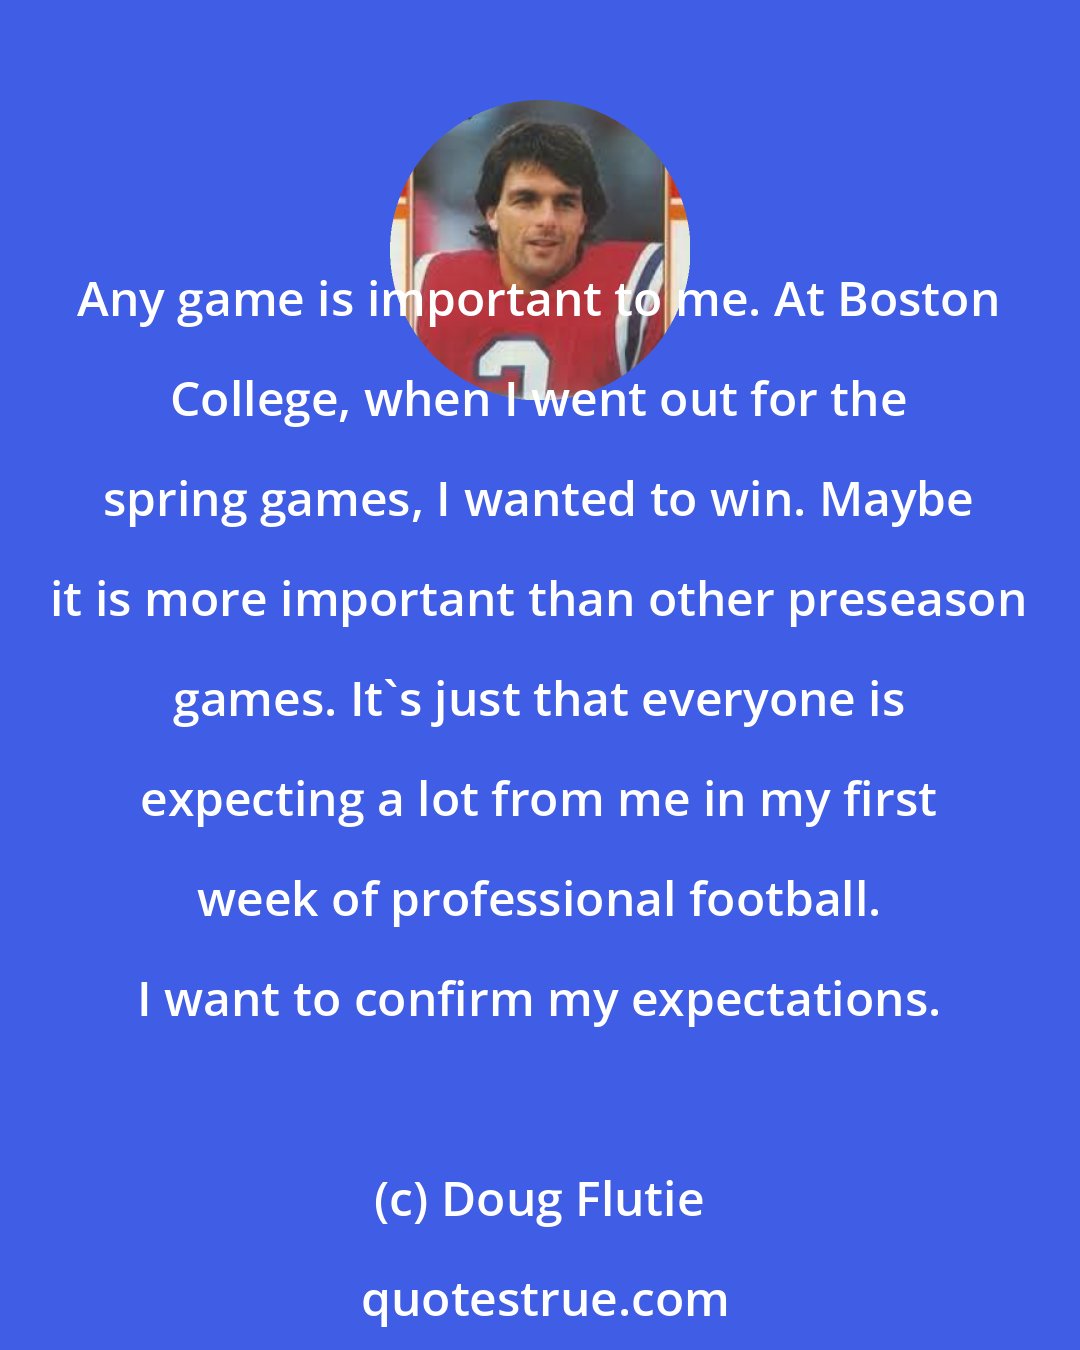 Doug Flutie: Any game is important to me. At Boston College, when I went out for the spring games, I wanted to win. Maybe it is more important than other preseason games. It's just that everyone is expecting a lot from me in my first week of professional football. I want to confirm my expectations.